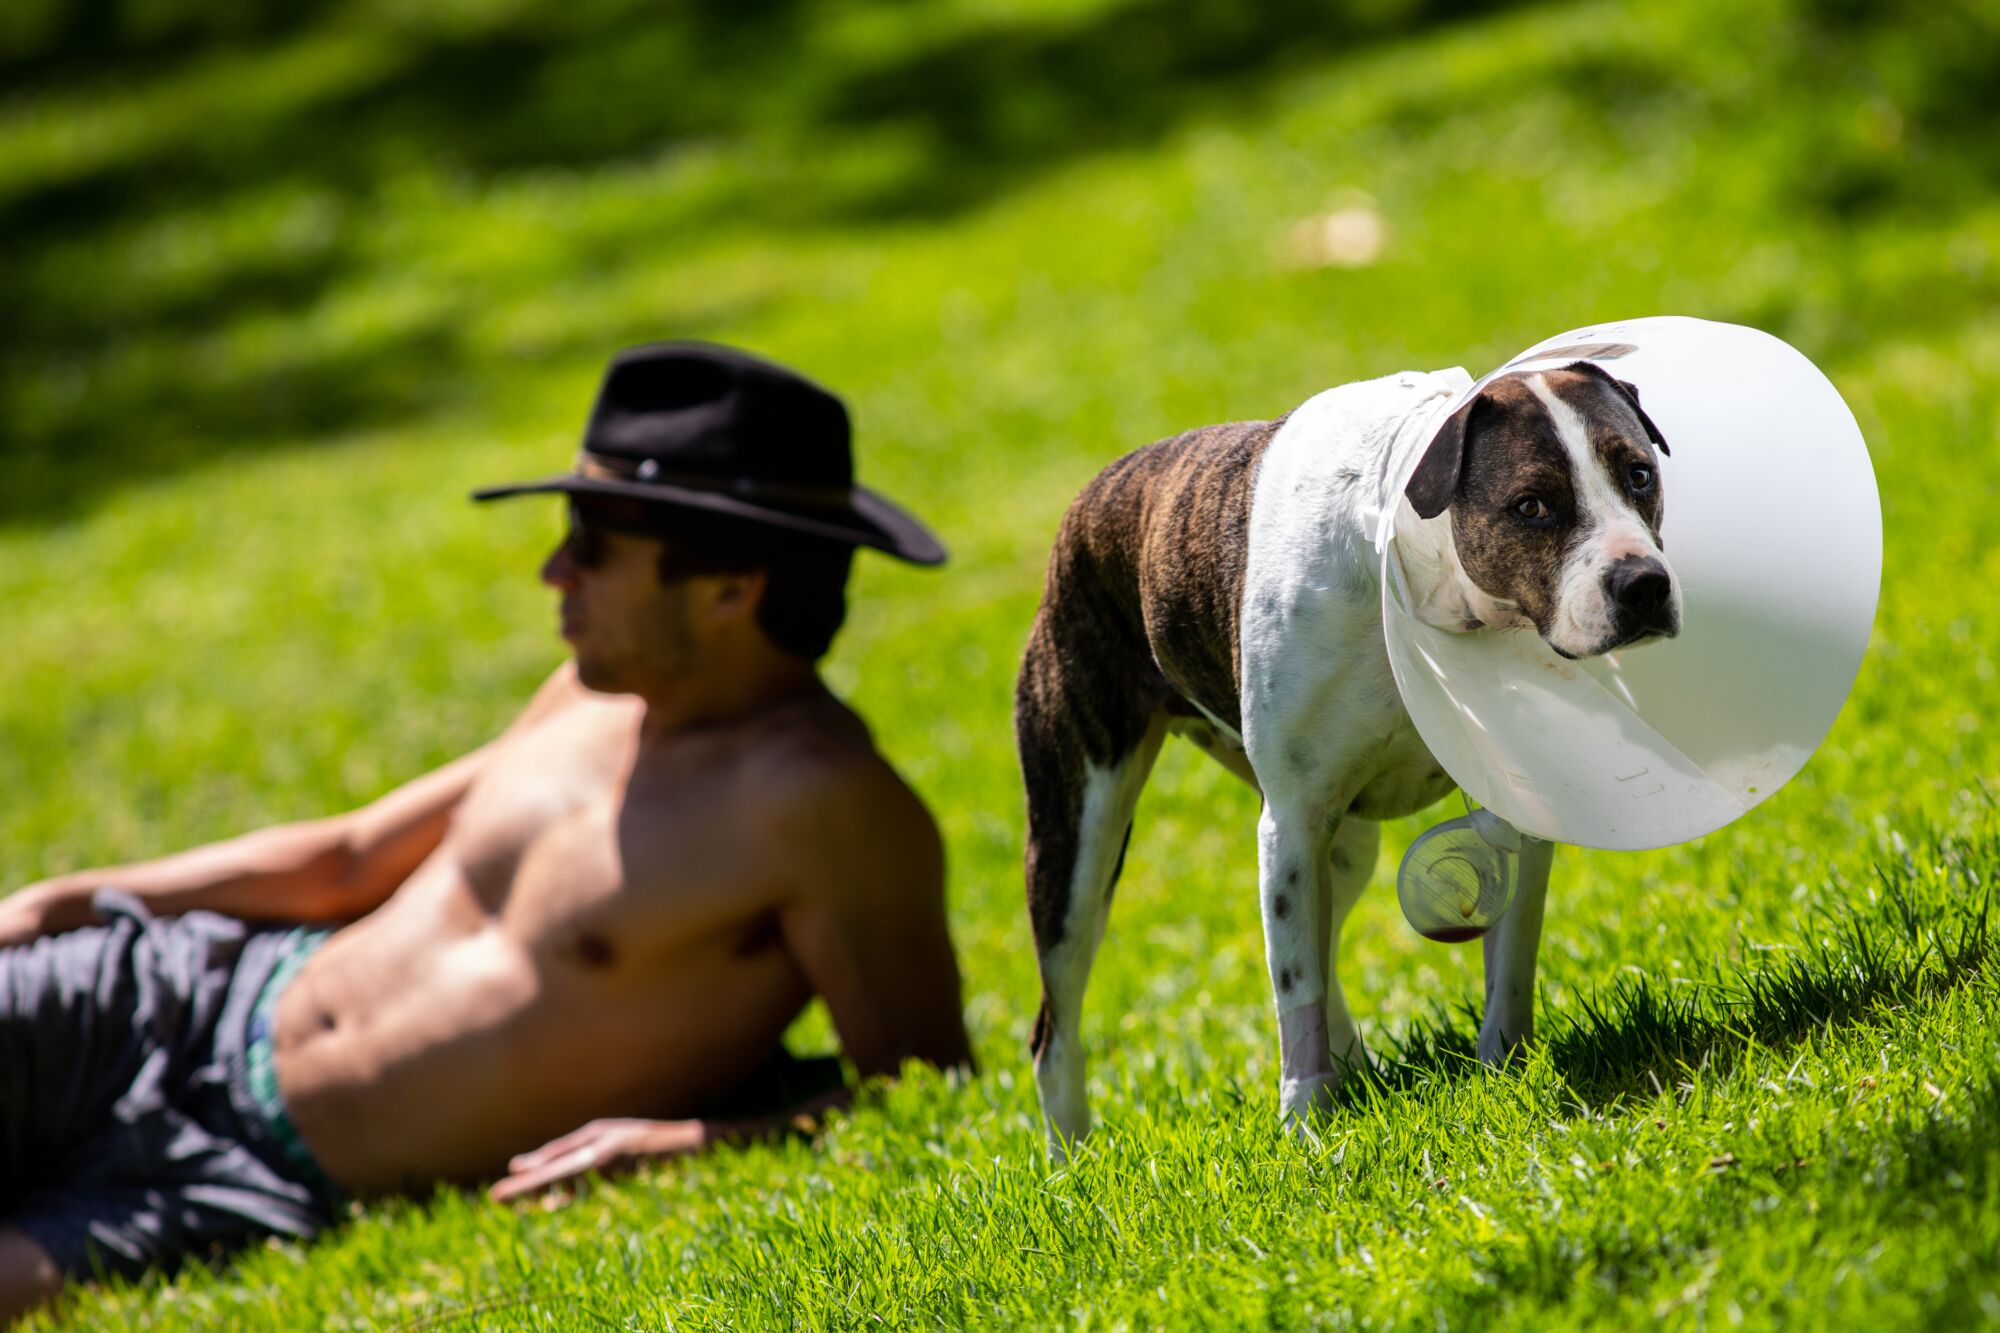 Django, wearing a collar after a surgery, spent time looking for lizards while his "dad," Jared Talla, relaxed on a grassy patch near the Silver Lake Recreation Center in Los Angeles.